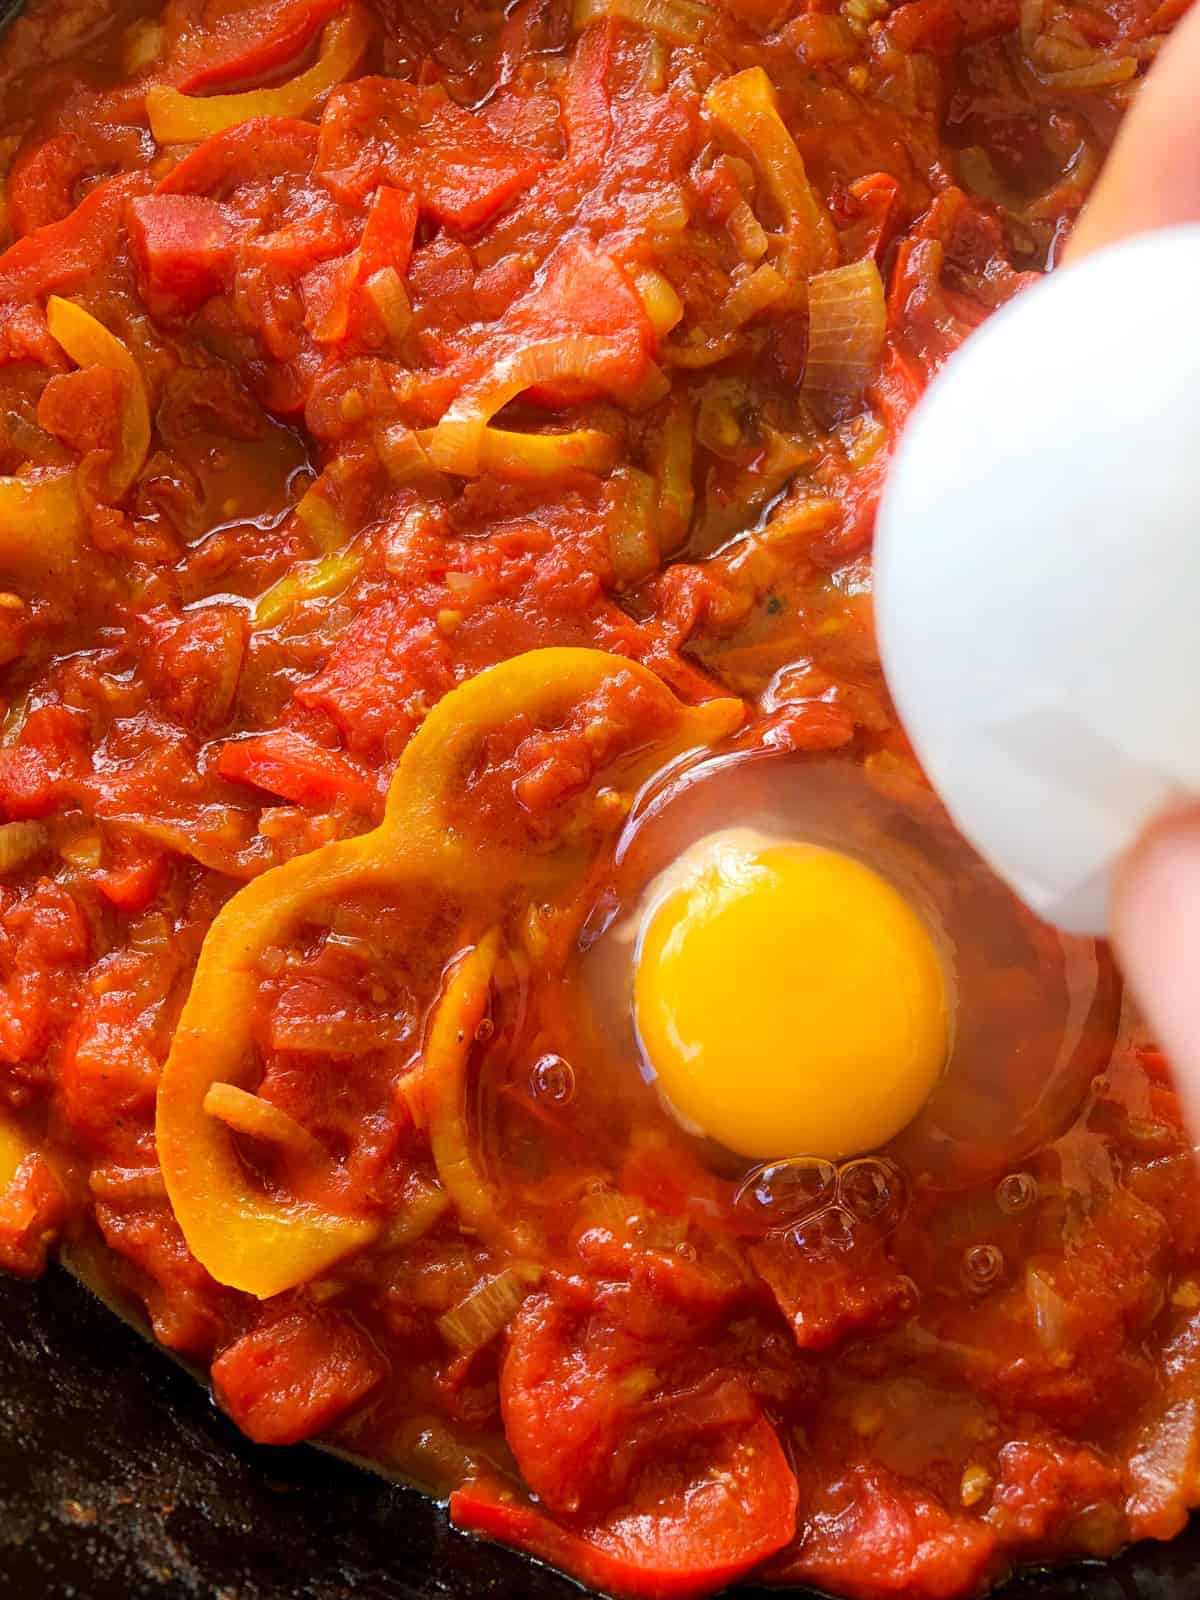 Add eggs to skillet